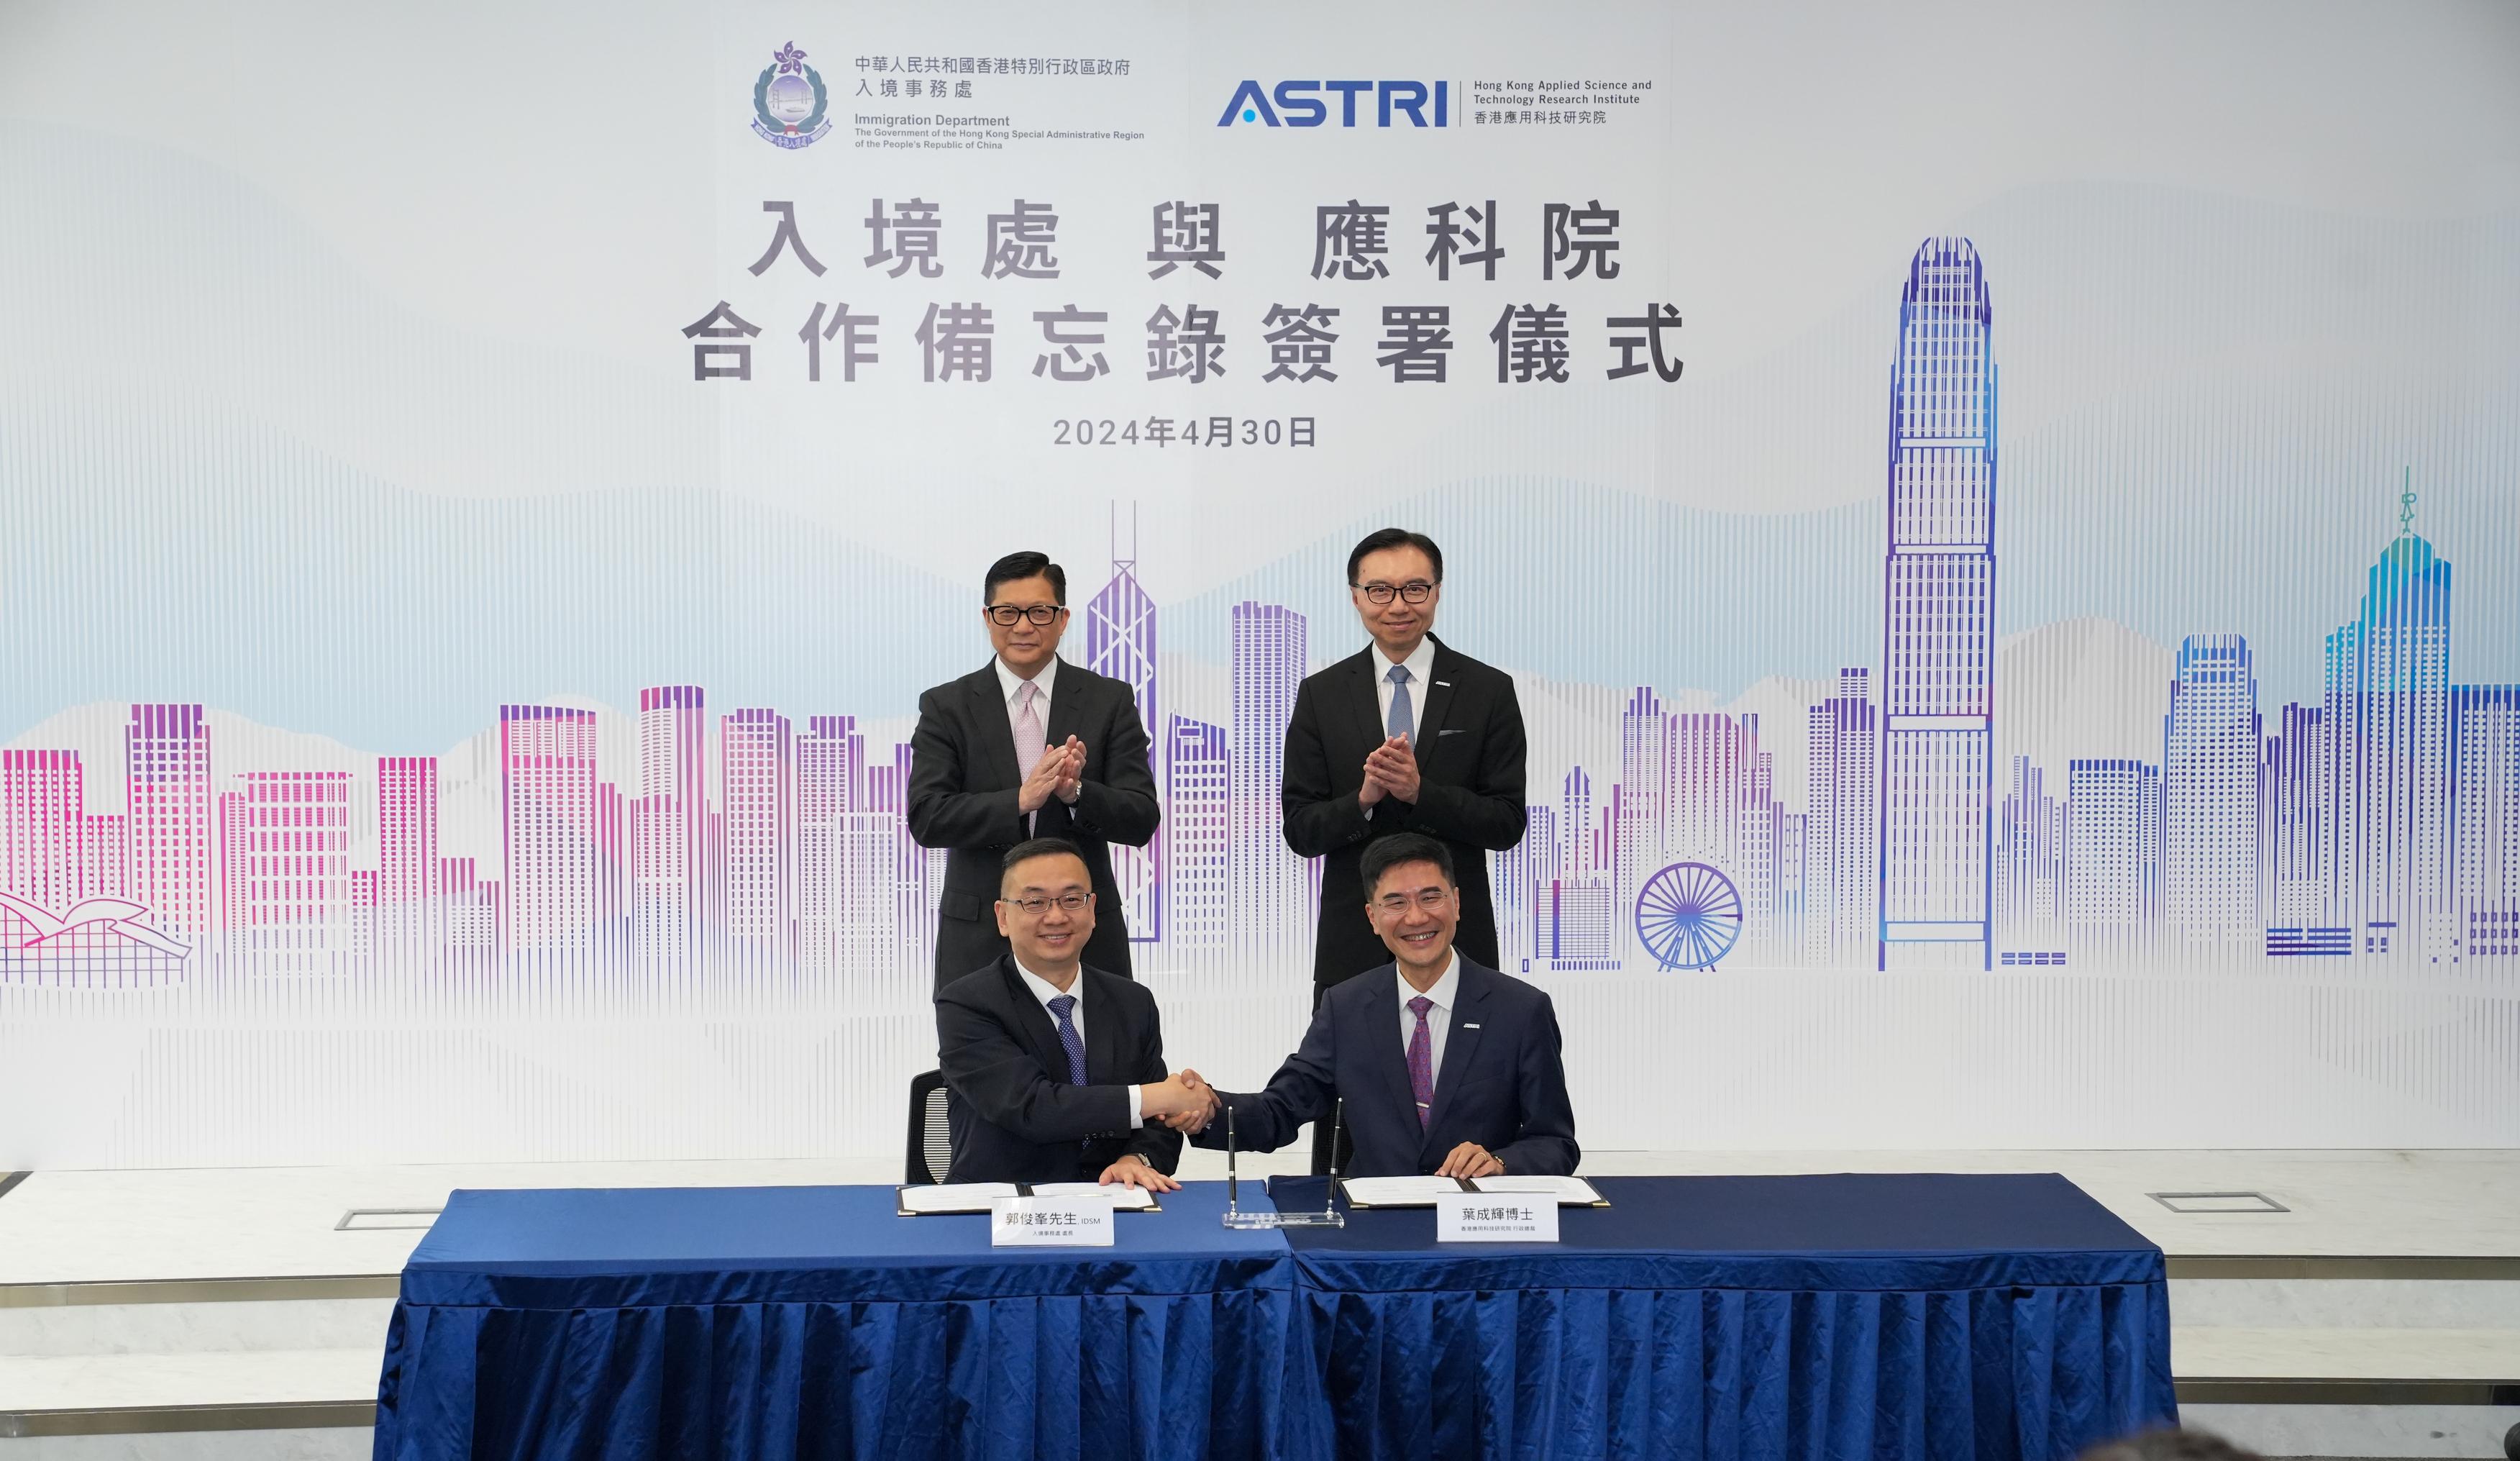 Witnessed by the Secretary for Security, Mr Tang Ping-keung (back row, left), and the Board Chairman of the Hong Kong Applied Science and Technology Research Institute (ASTRI), Mr Sunny Lee (back row, right), the Director of Immigration, Mr Benson Kwok (front row, left), today (April 30) signed a Memorandum of Understanding with the Chief Executive Officer of ASTRI, Dr Denis Yip (front row, right), to promote innovative technologies in public services.